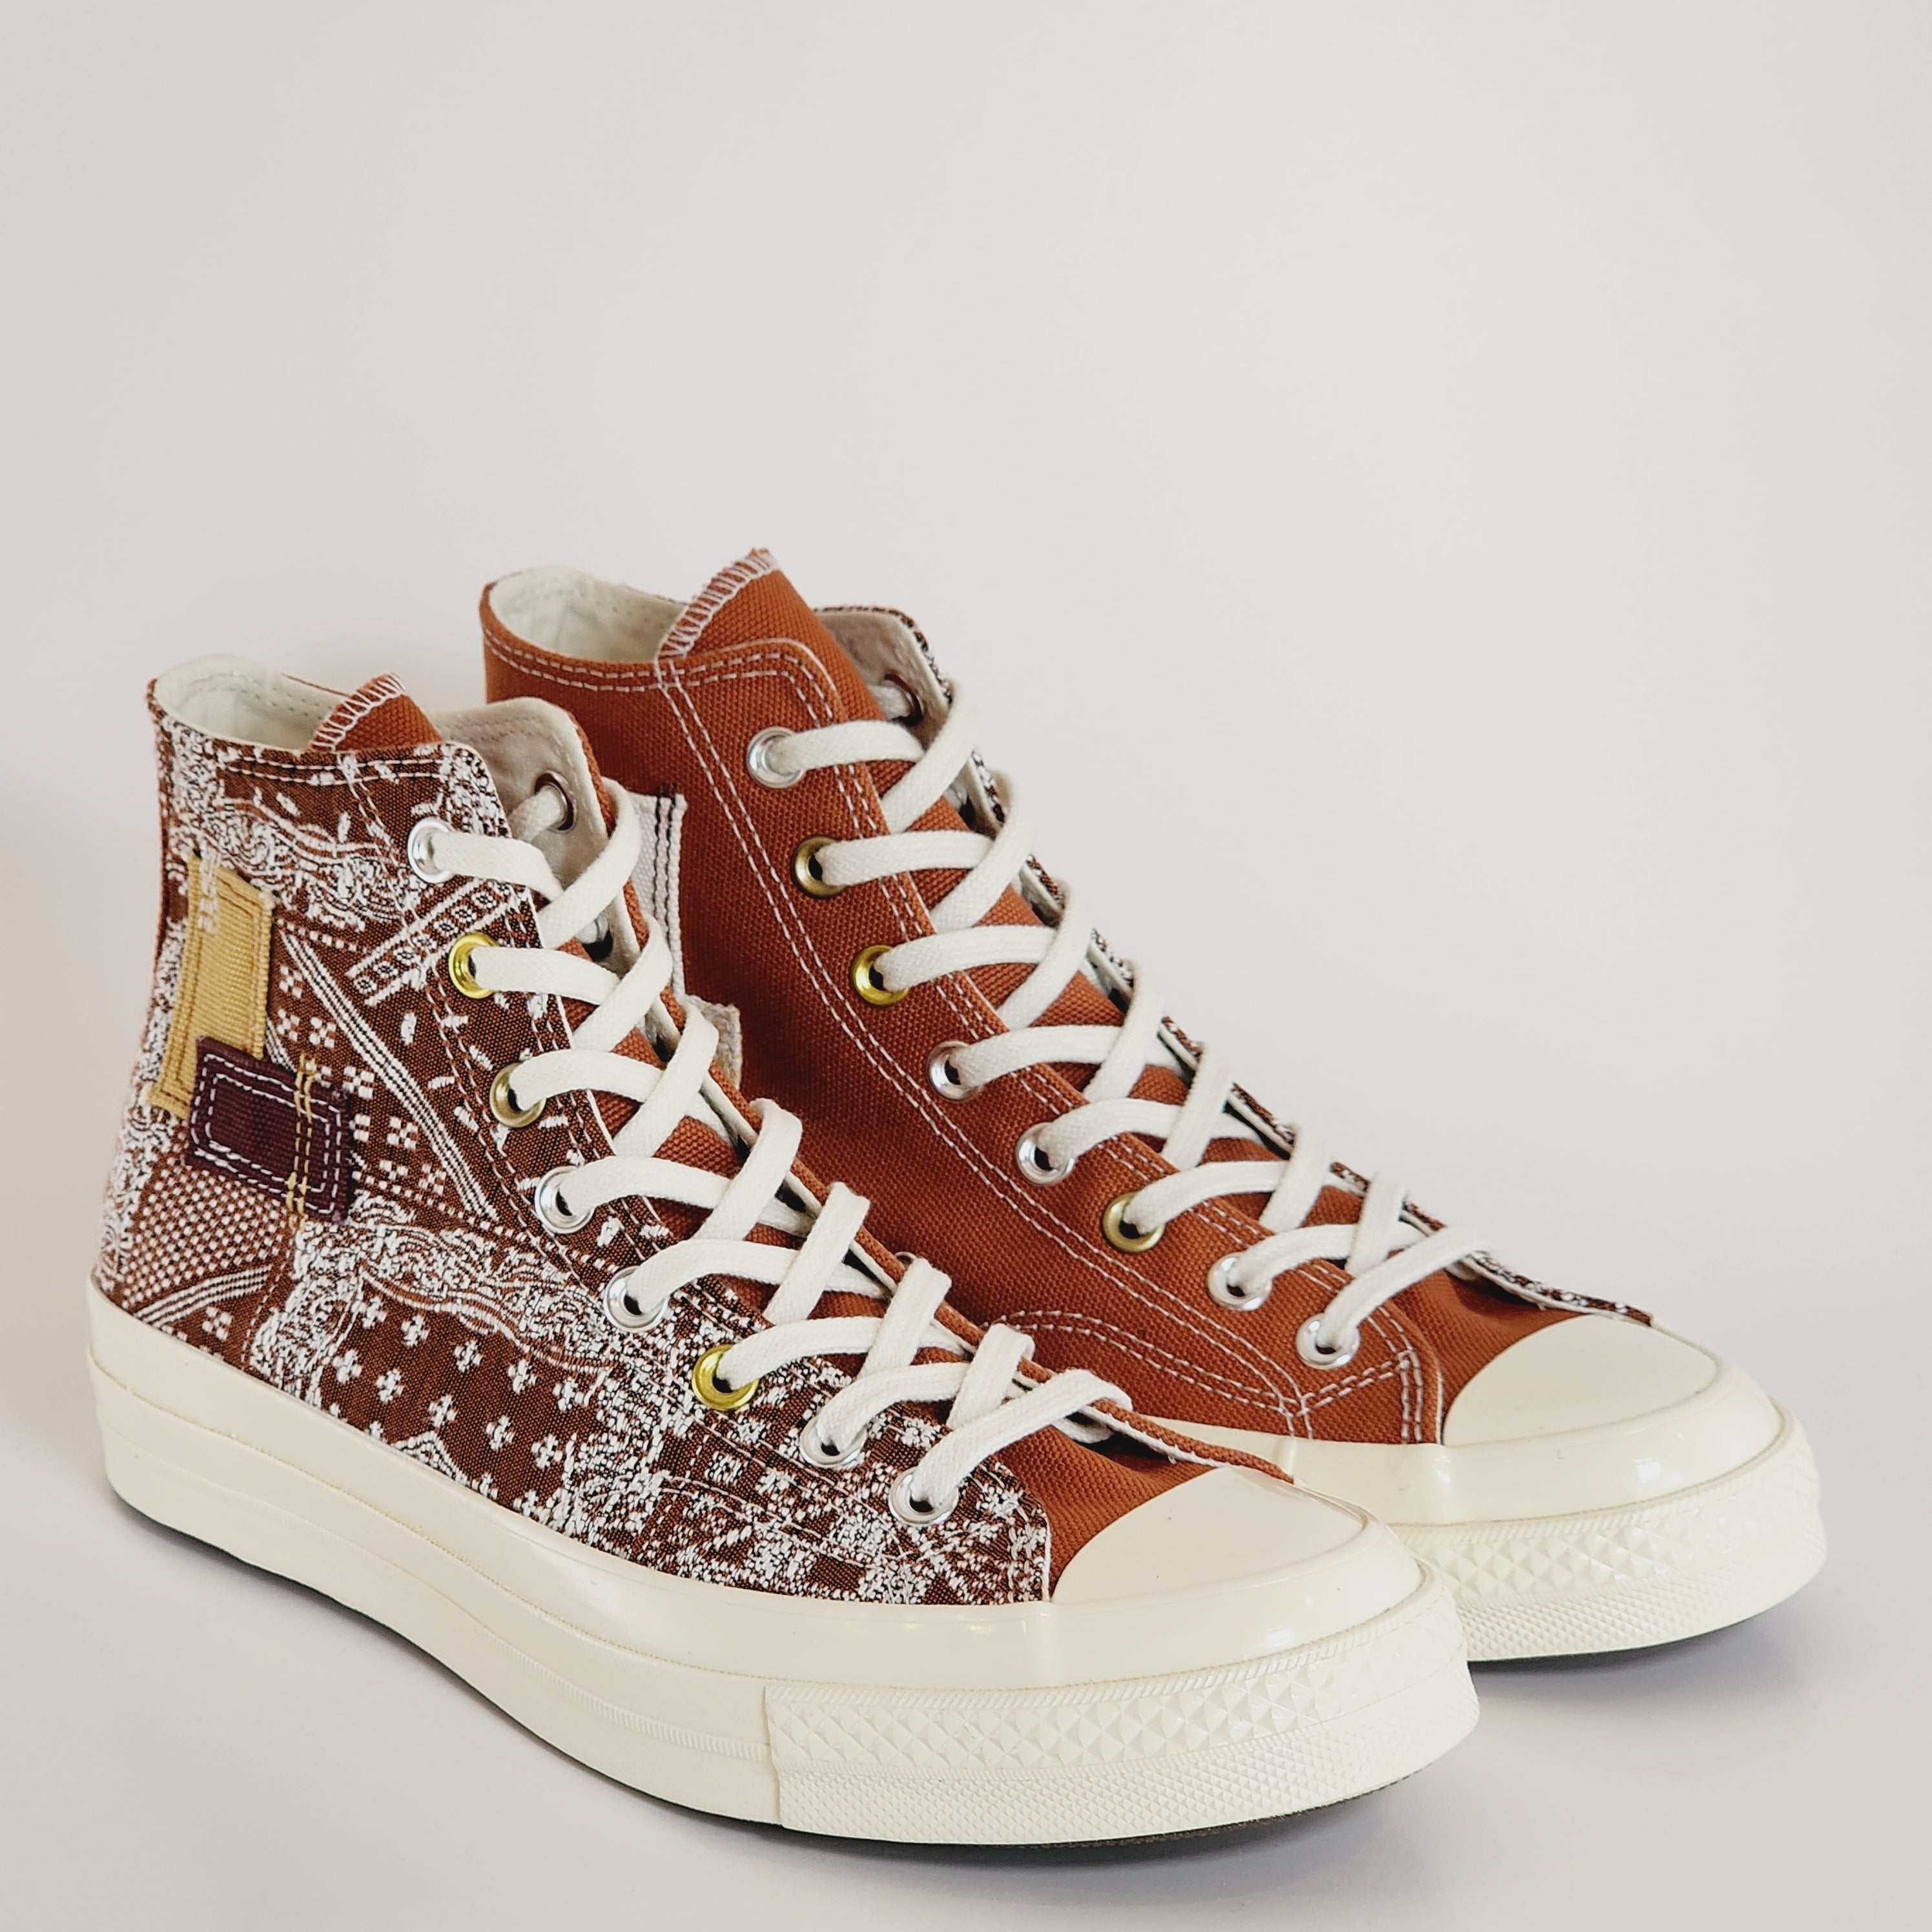 Converse Chuck 70 Hi Patchwork 'Tawny Owl' Canvas Unisex Sneakers A05205C NWT